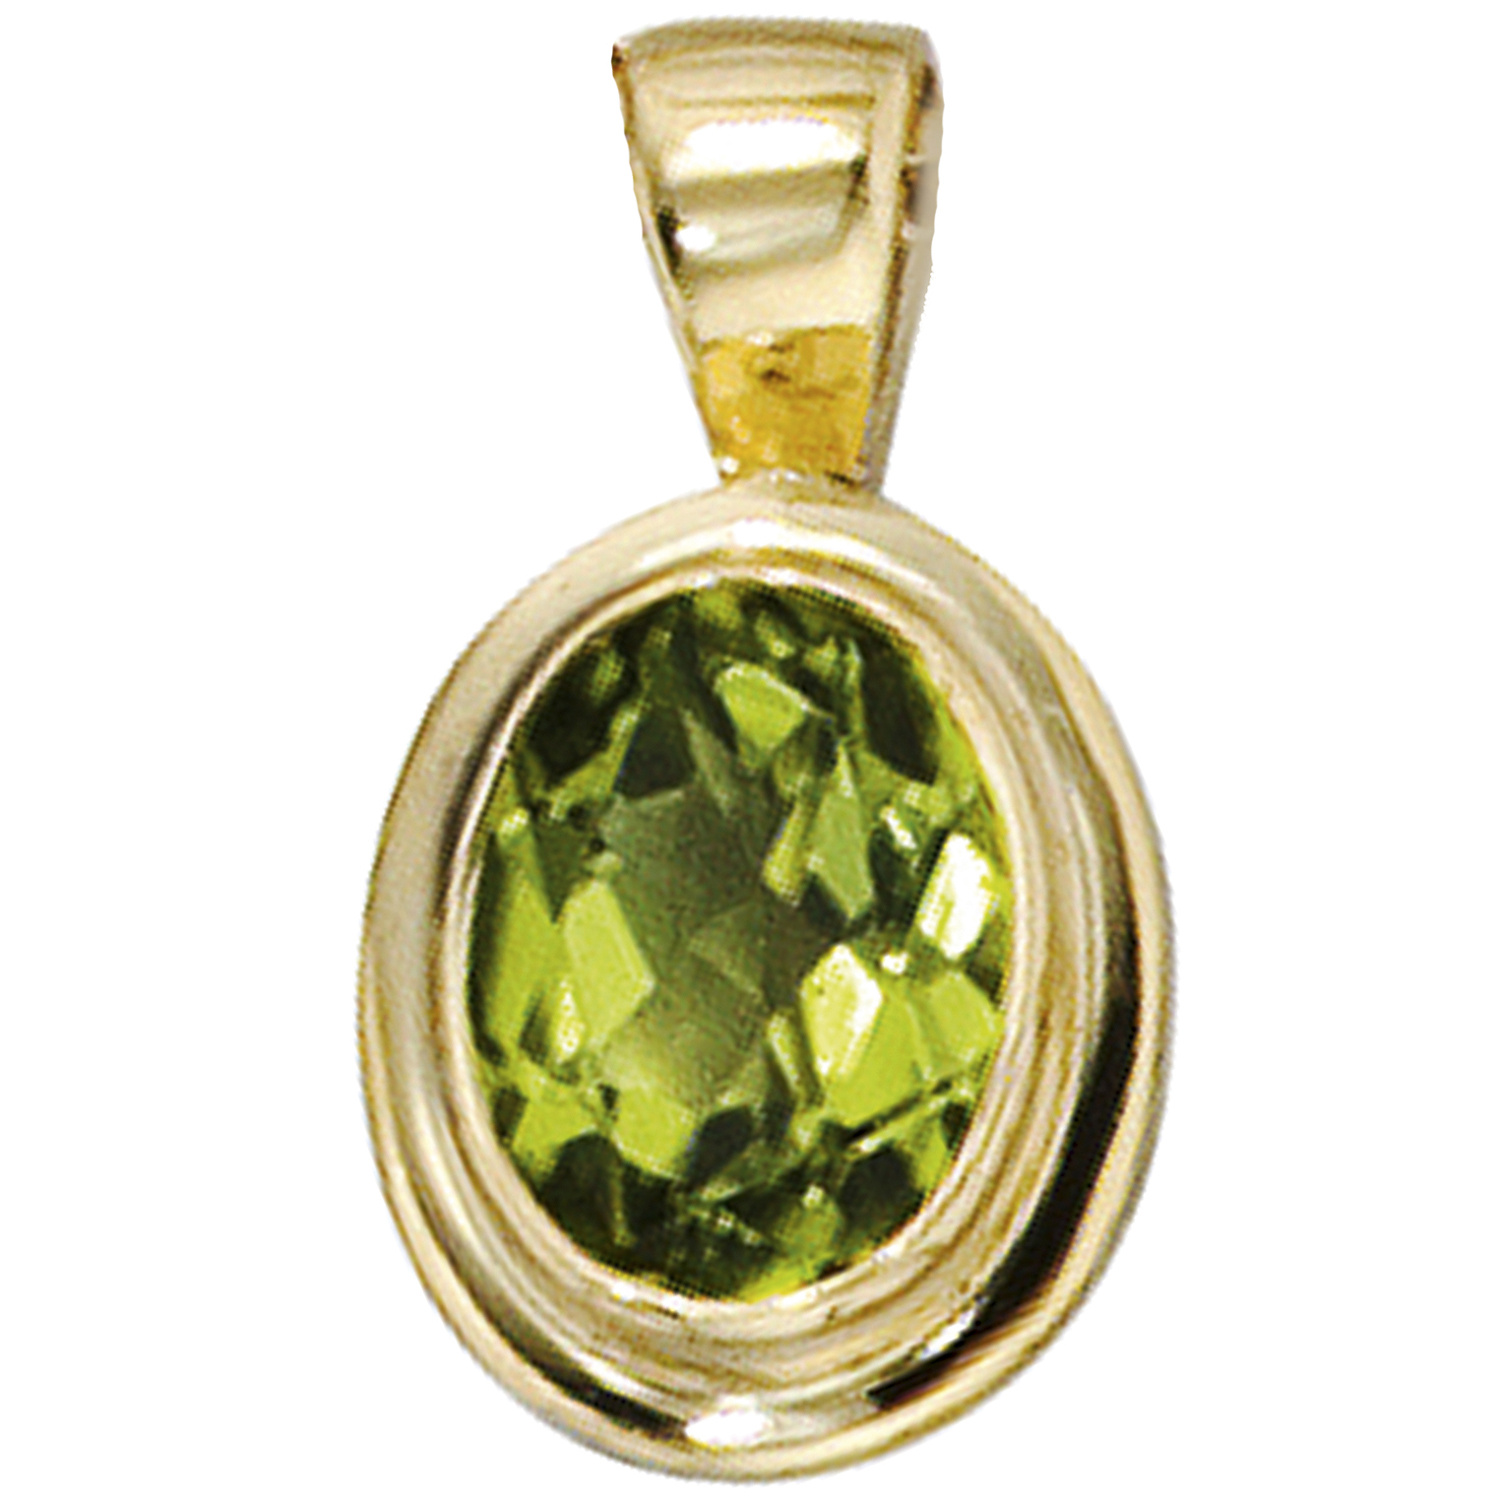 Anhnger 585 Gold Gelbgold 1 Peridot grn